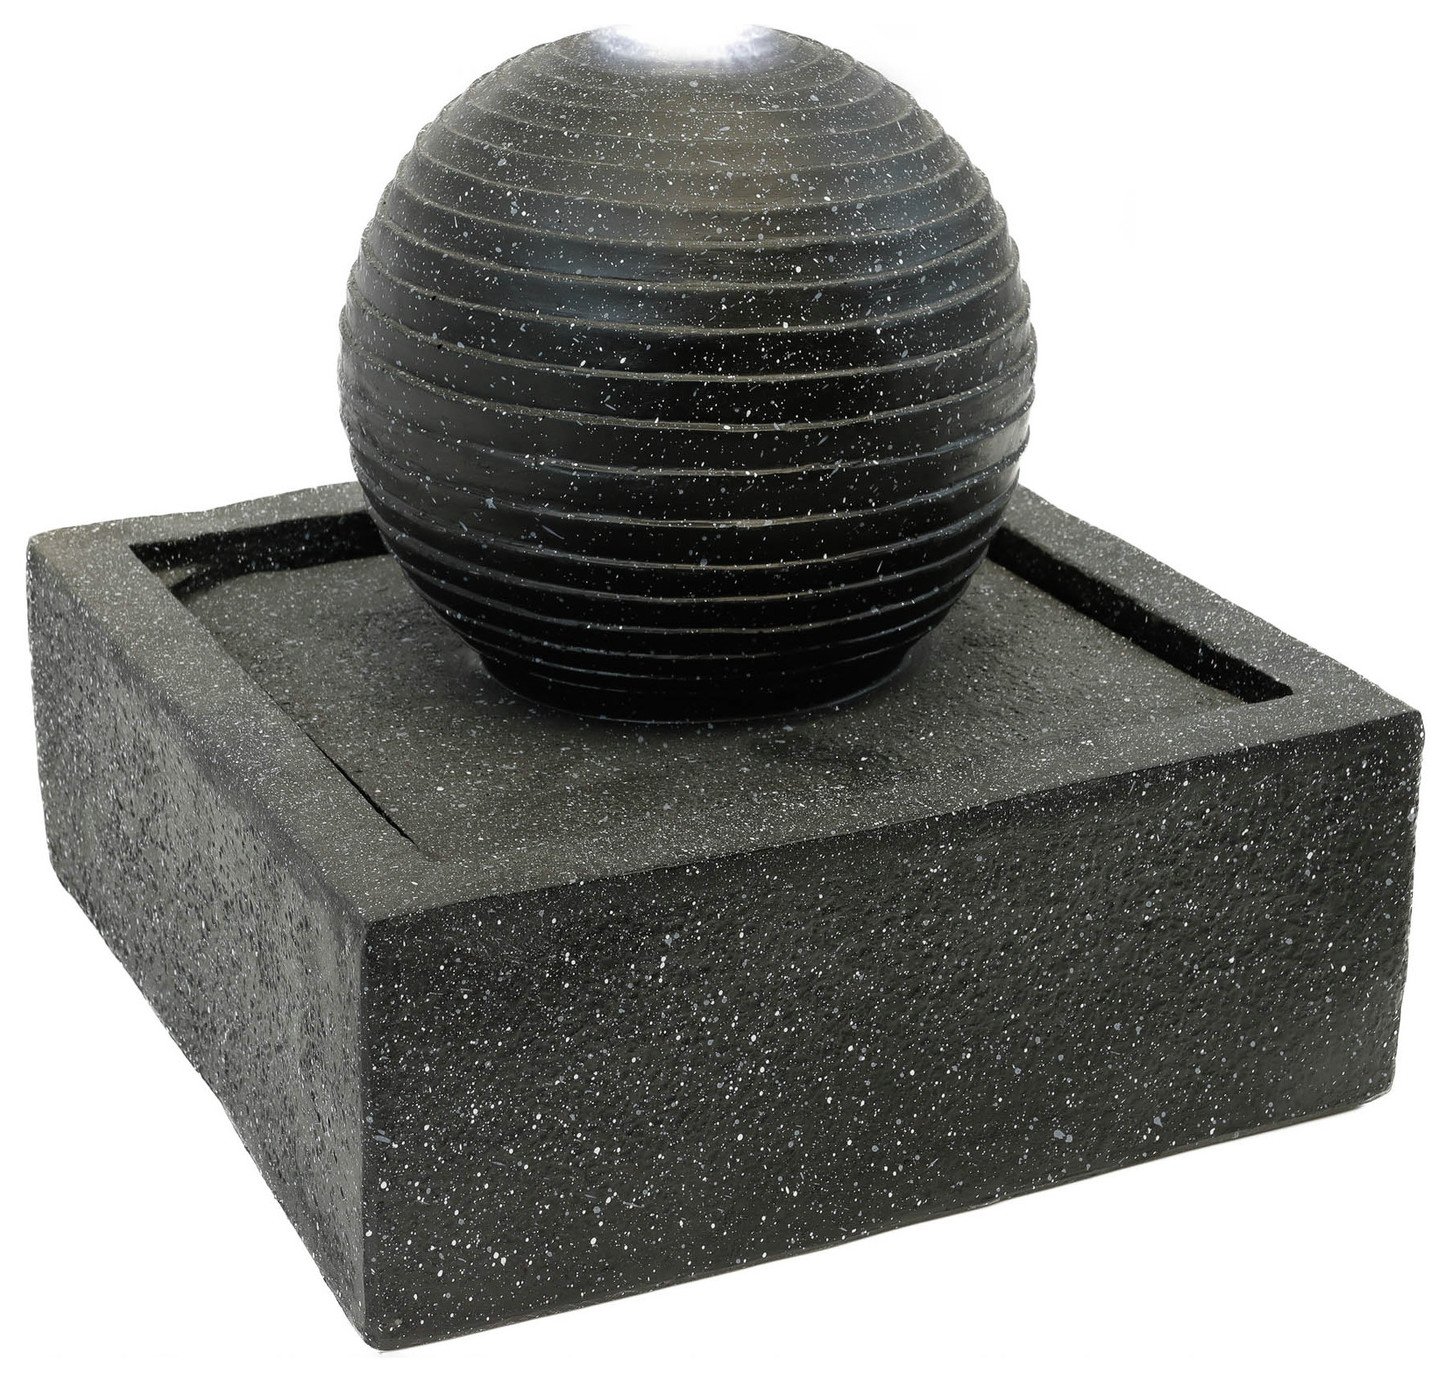 Gardenwize Solar Square Water Feature - Black Ball 